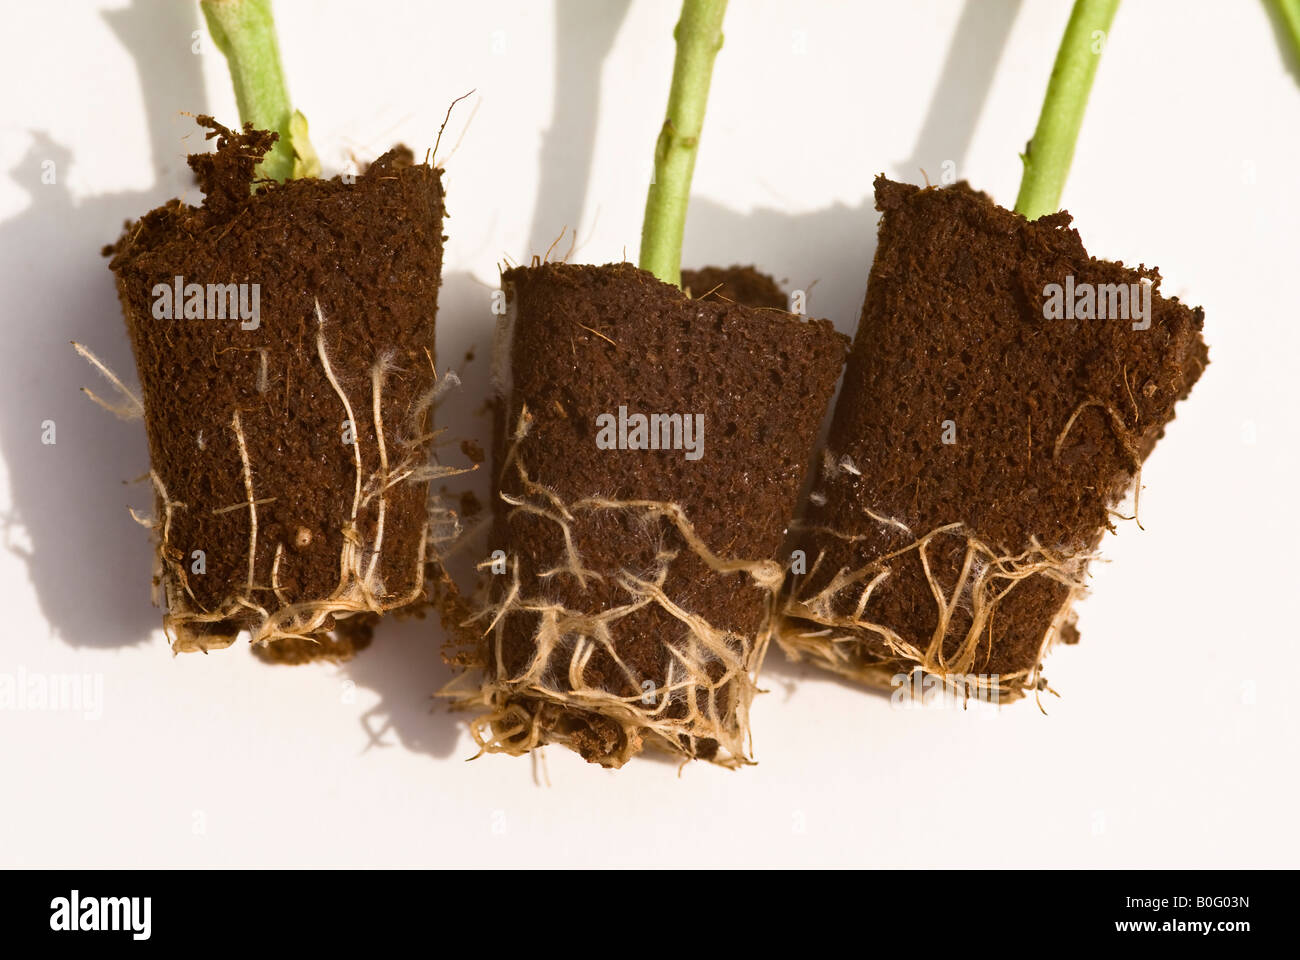 Newly delivered postal package of rooted chrysanthemum plants Stock Photo